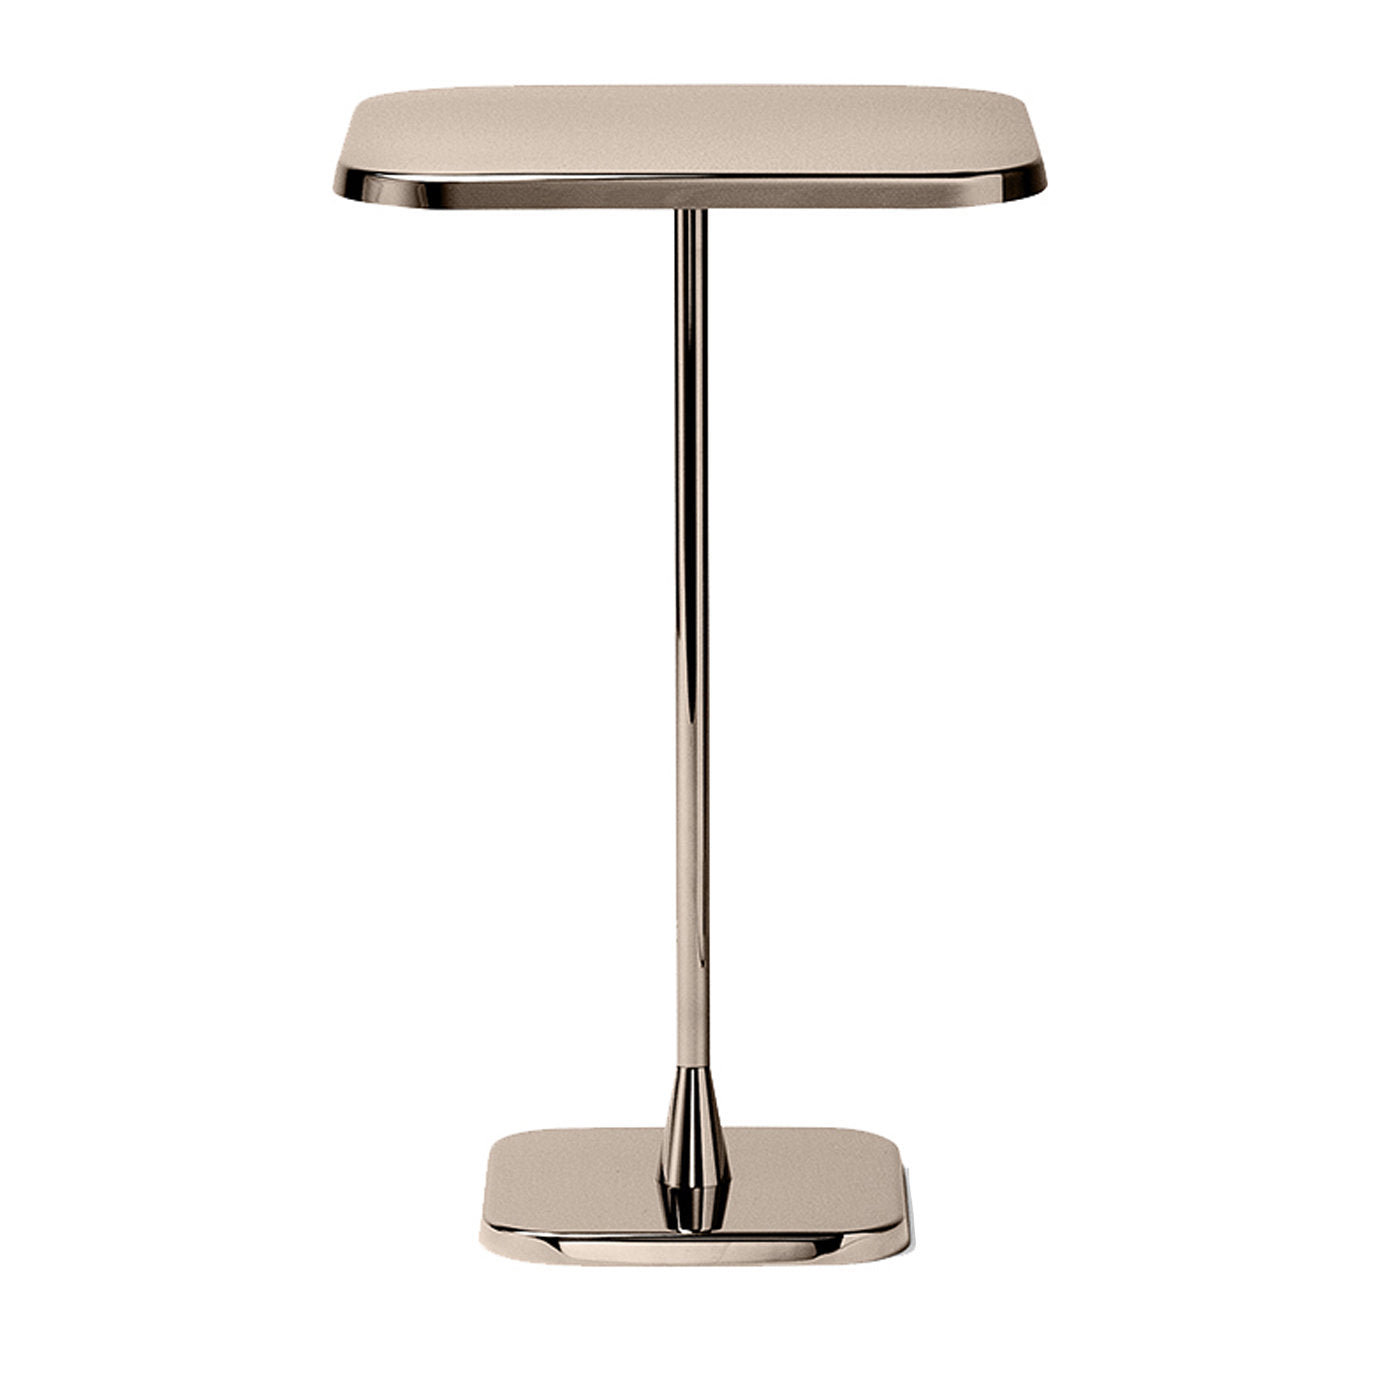 Opera Squared Table in Copper Finish By Richard Hutten - Main view